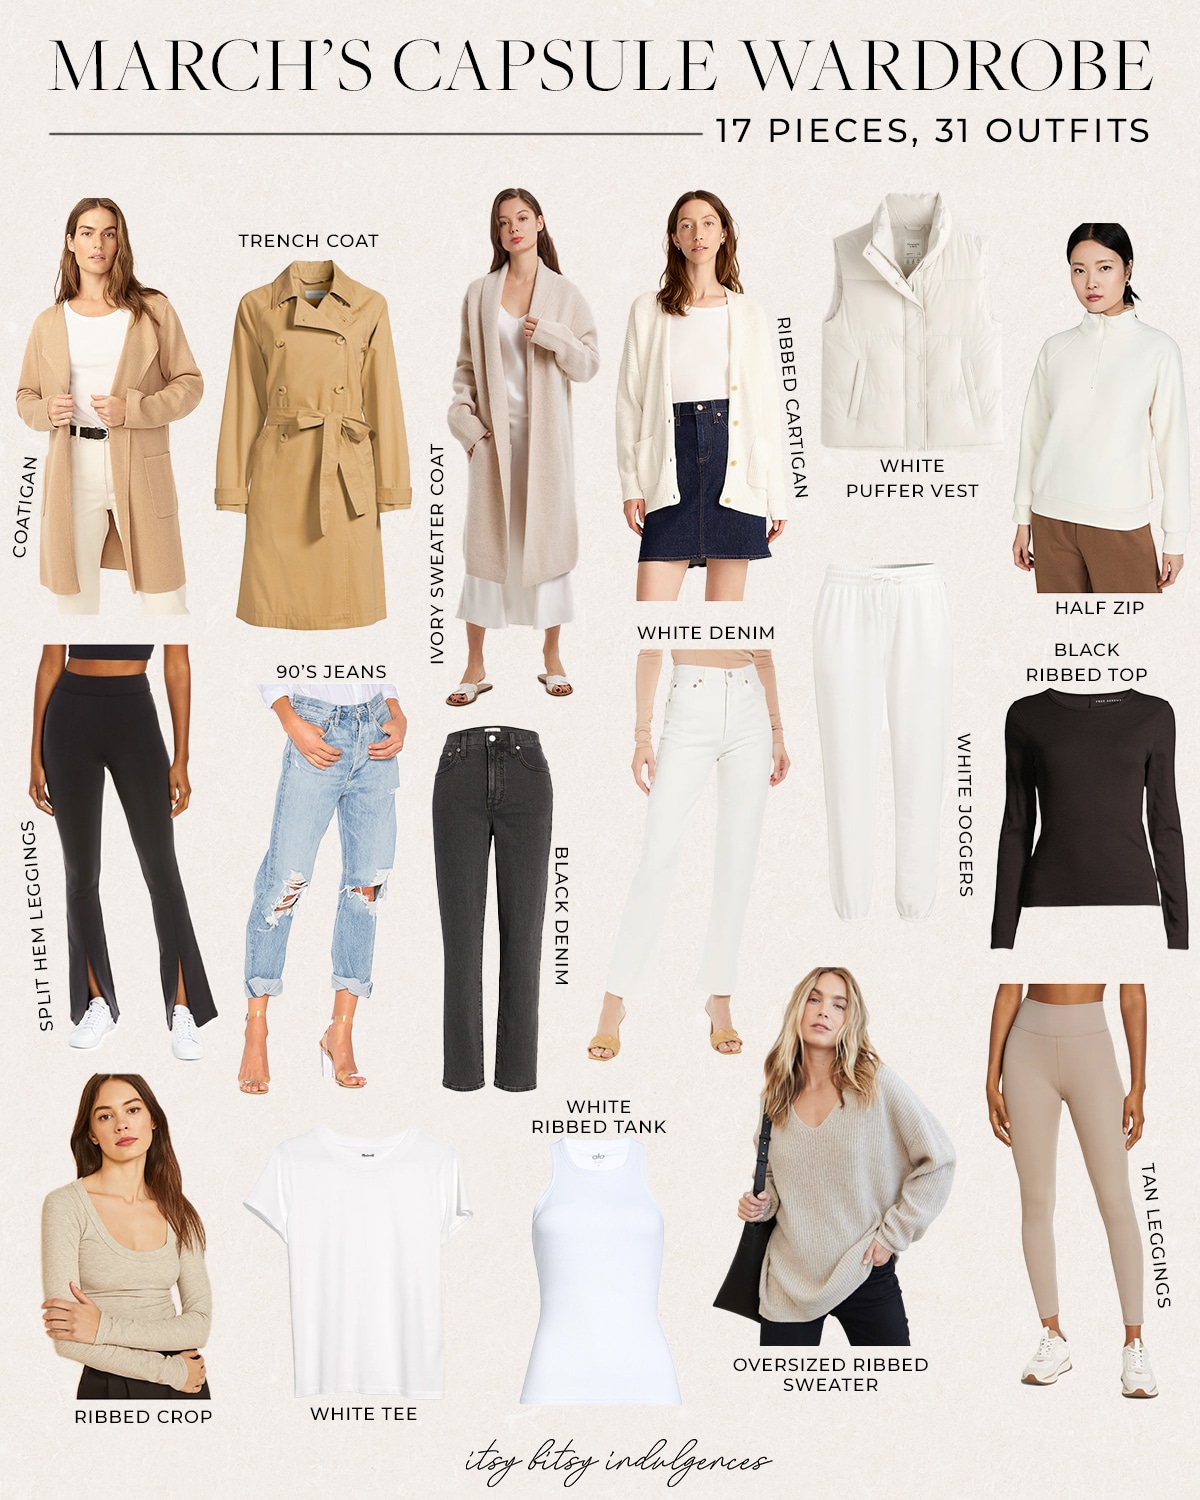 March's Capsule Wardrobe || 17 Pieces, 31 Outfits - posts from Shannon ...